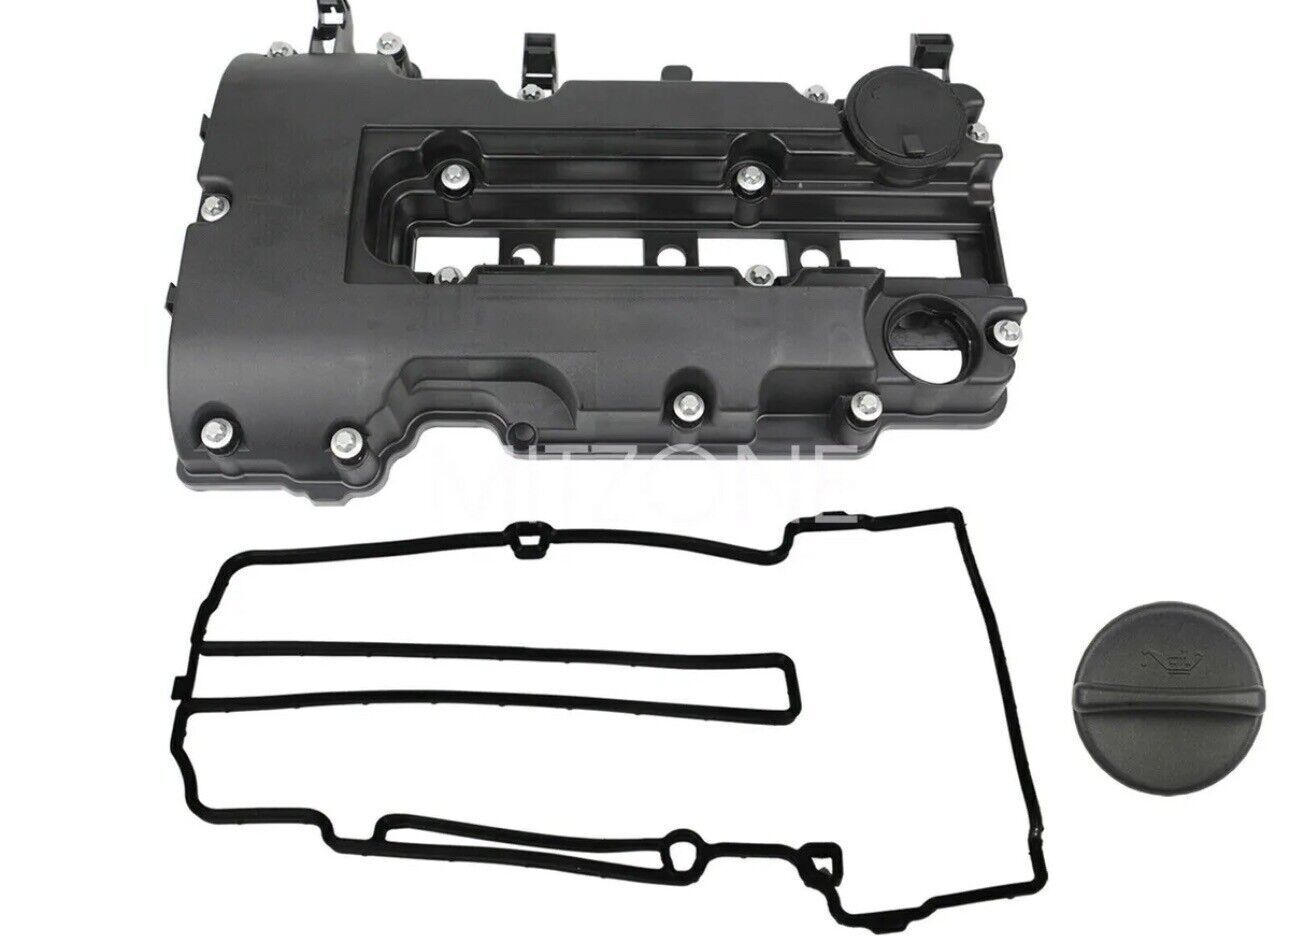 Fits Chevy Cruze Sonic Trax Encore ELR Buick 1.4L Valve Cover w/ Gasket & Bolts